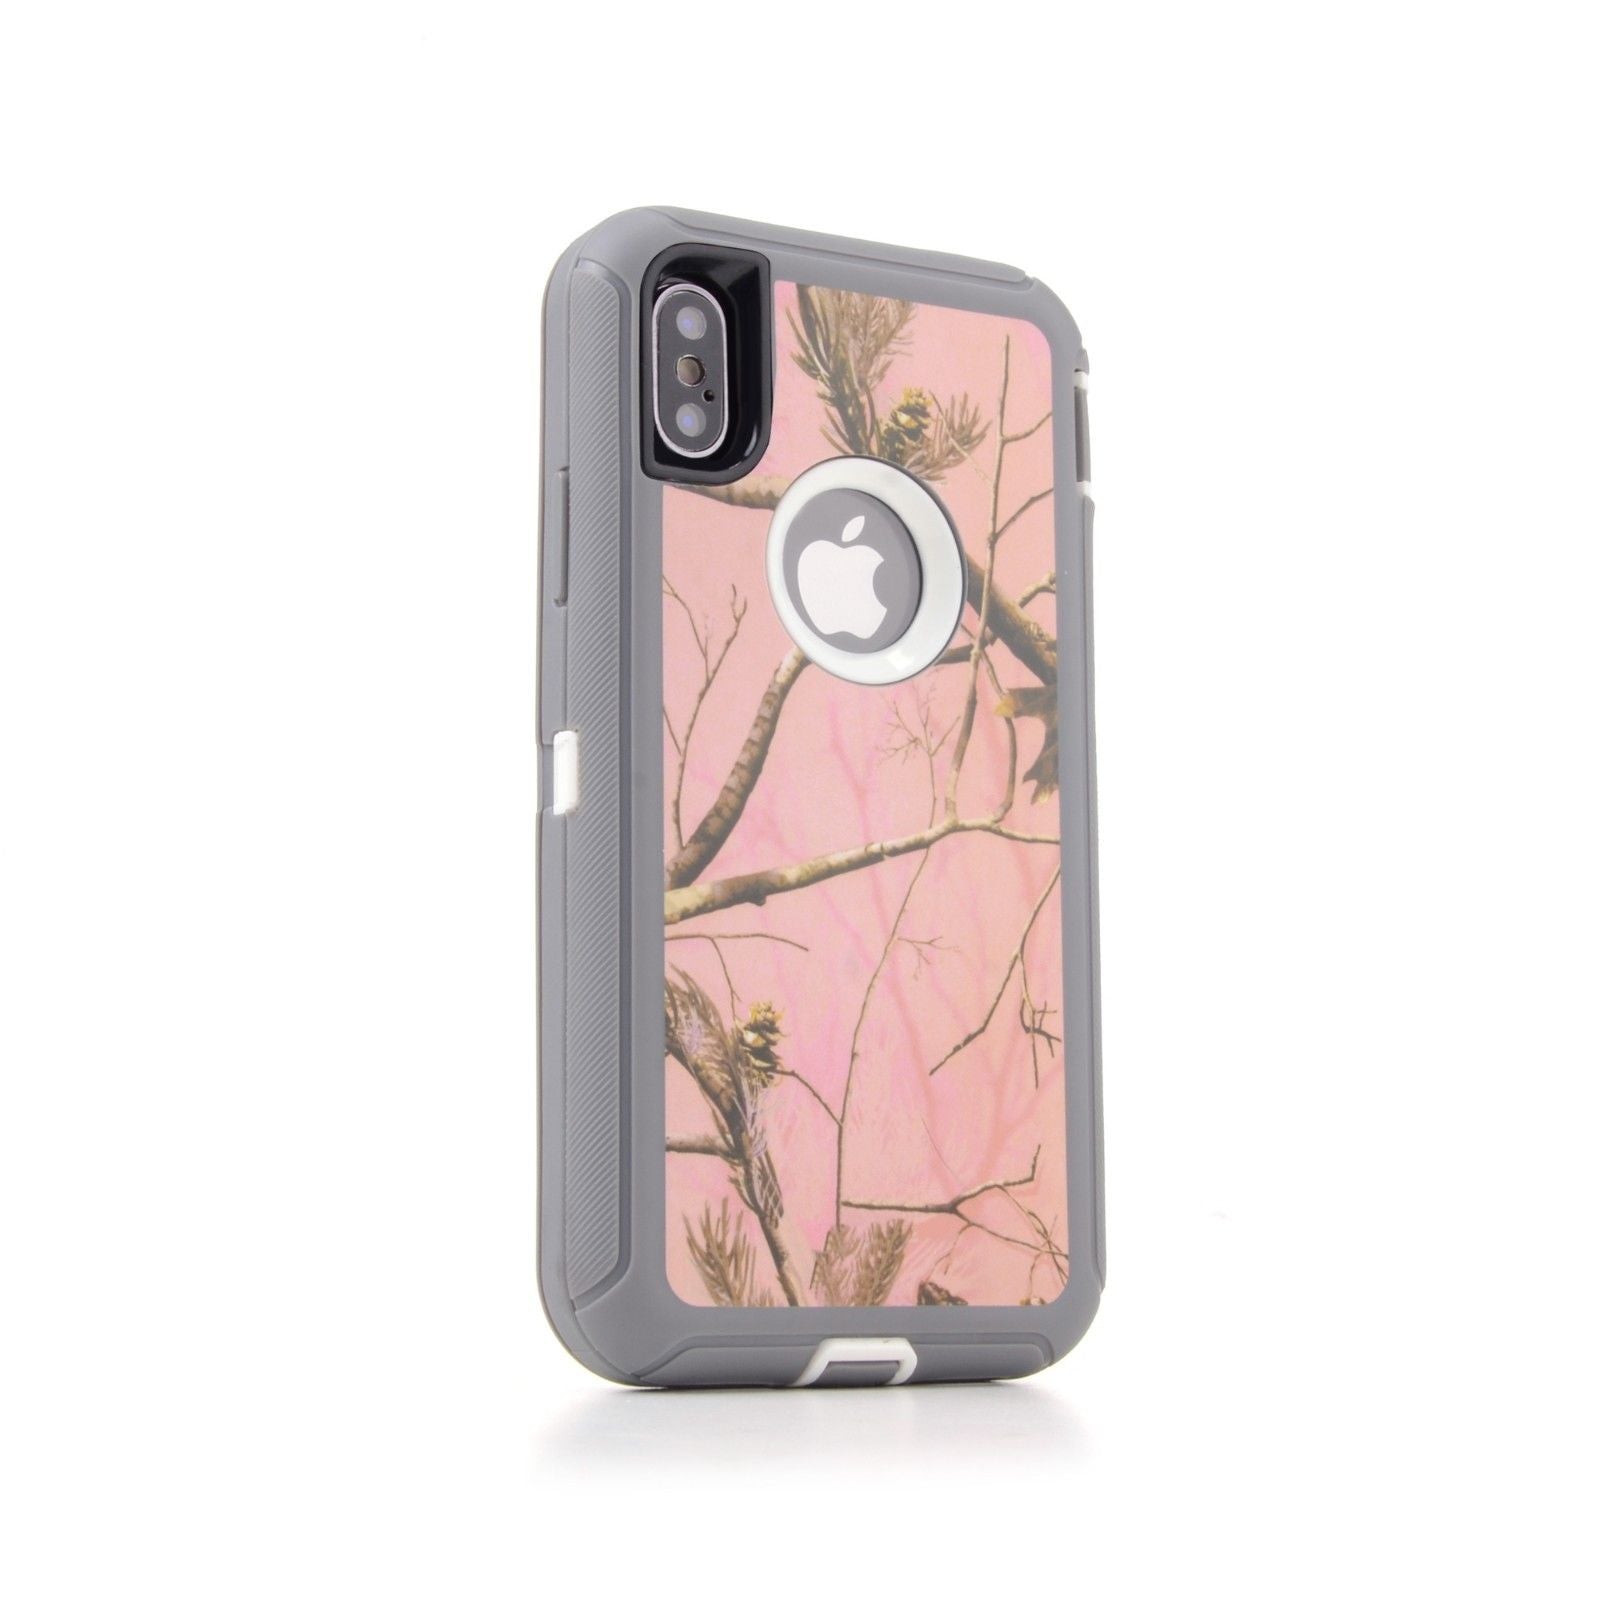 Case Hybrid Heavy Duty Shockproof Rubber For iPhone Se 6 Plus